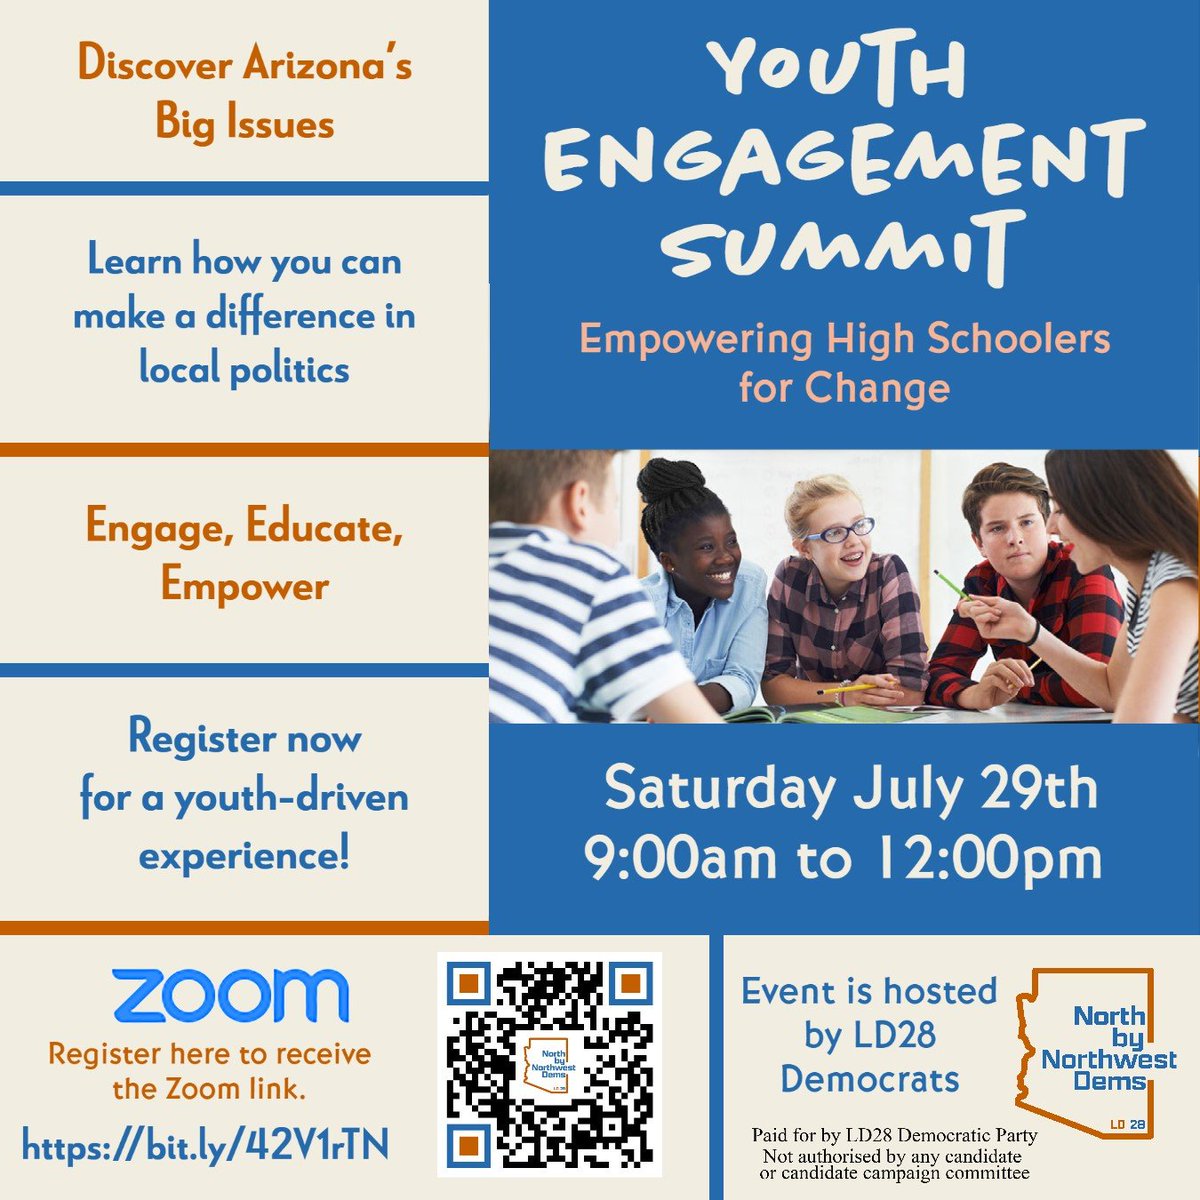 AZLD27Dems (@AZLD27Dems) on Twitter photo 2023-06-23 14:56:19